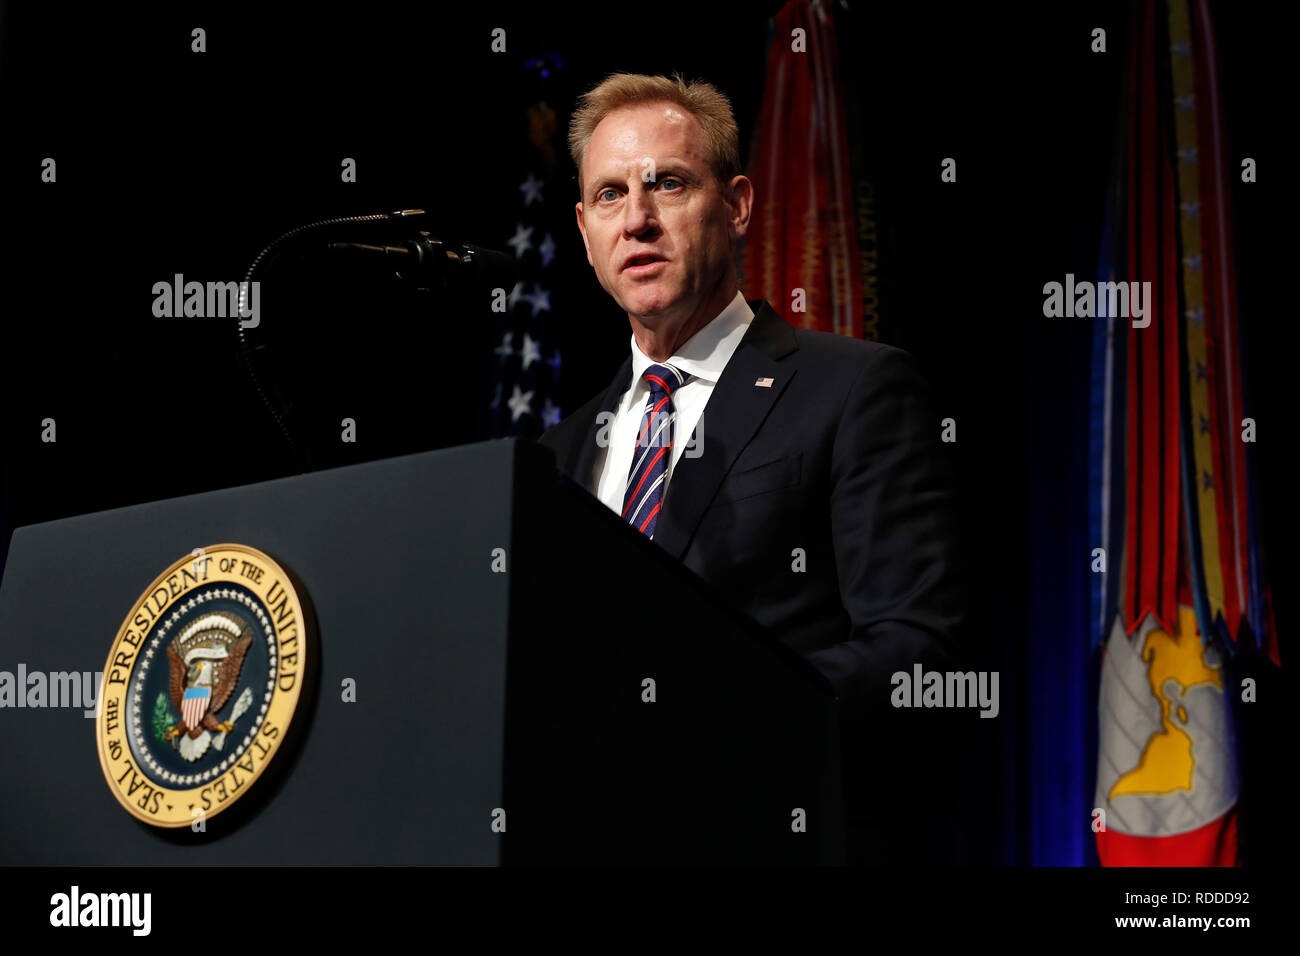 Acting Secretary of Defense Patrick Shanahan speaks during a Missile Defense Review announcement at the Pentagon, in Arlington, Virginia, January 17, 2019. Credit: Martin H. Simon/Pool via CNP /MediaPunch Stock Photo